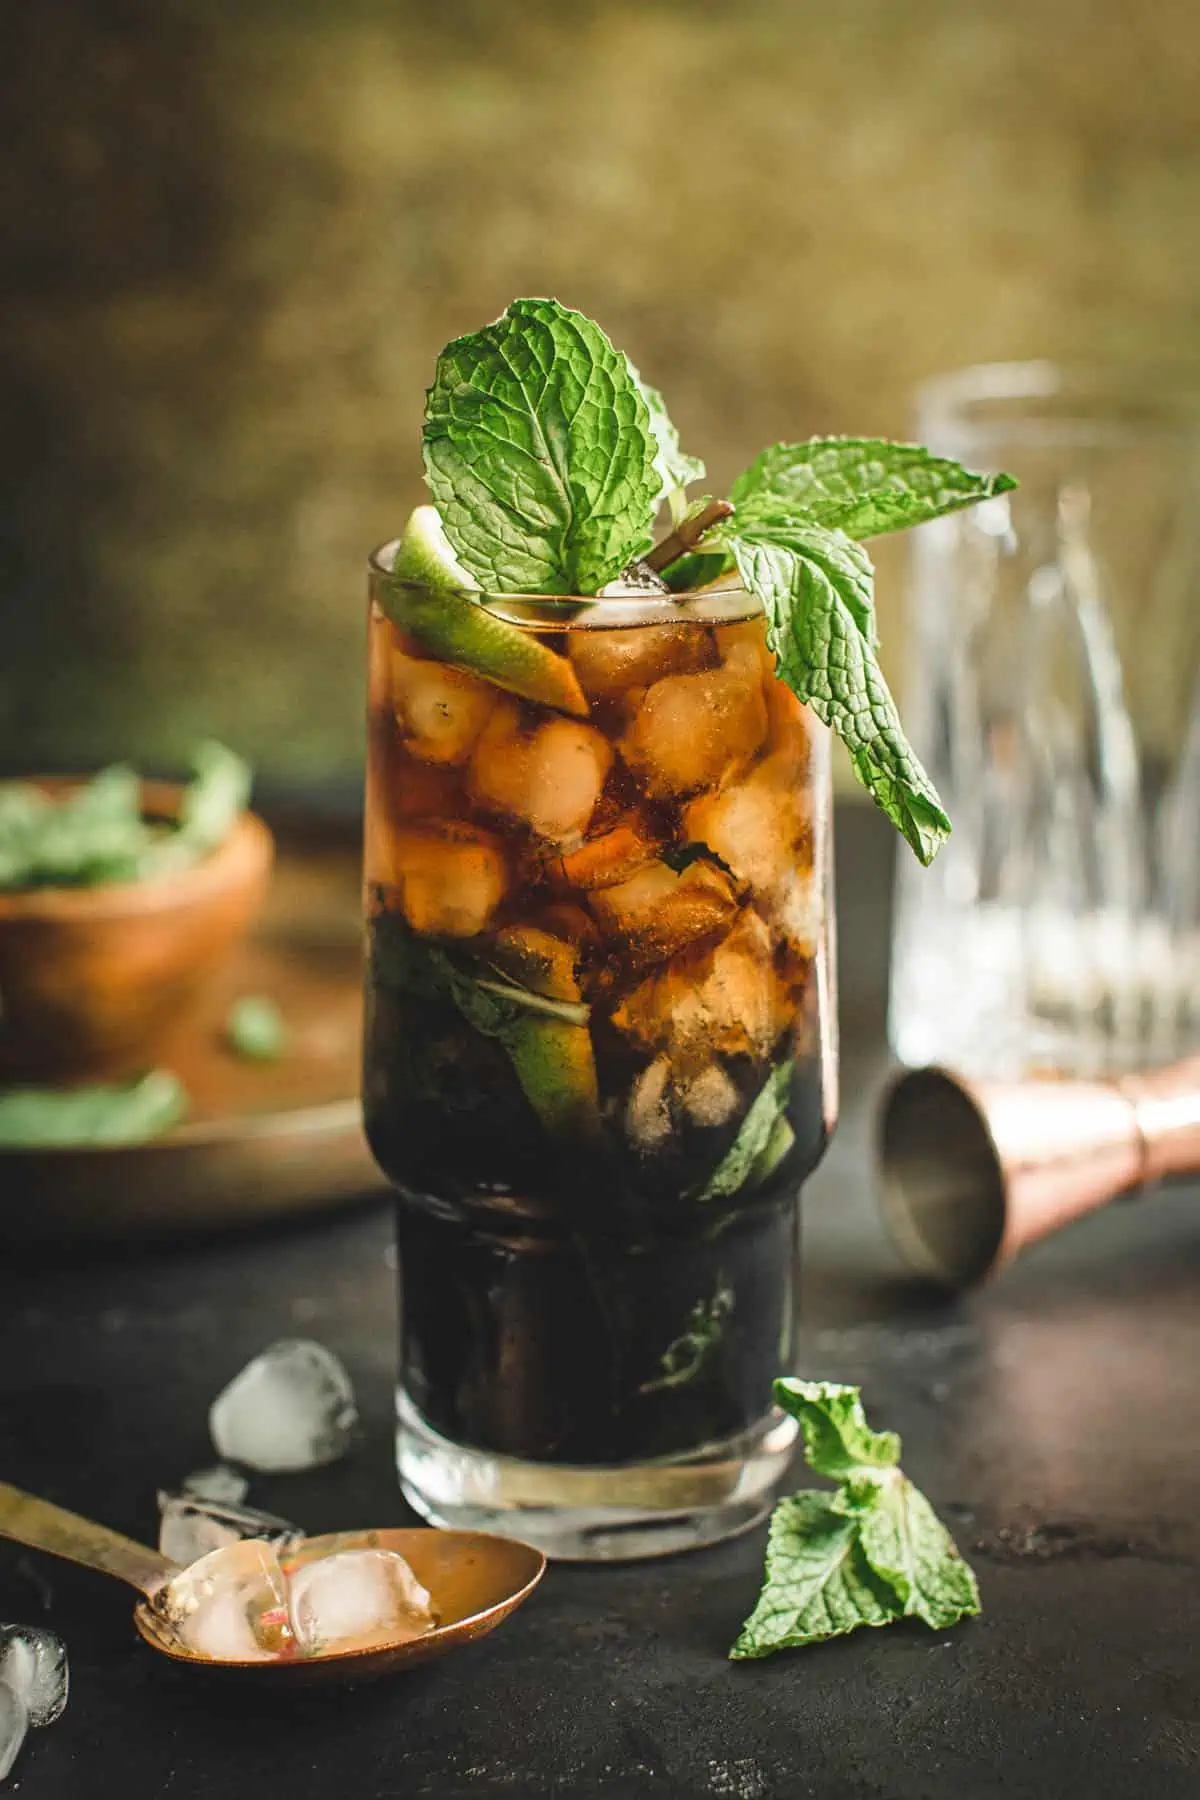 Black mojito with mint leaves for garnish.